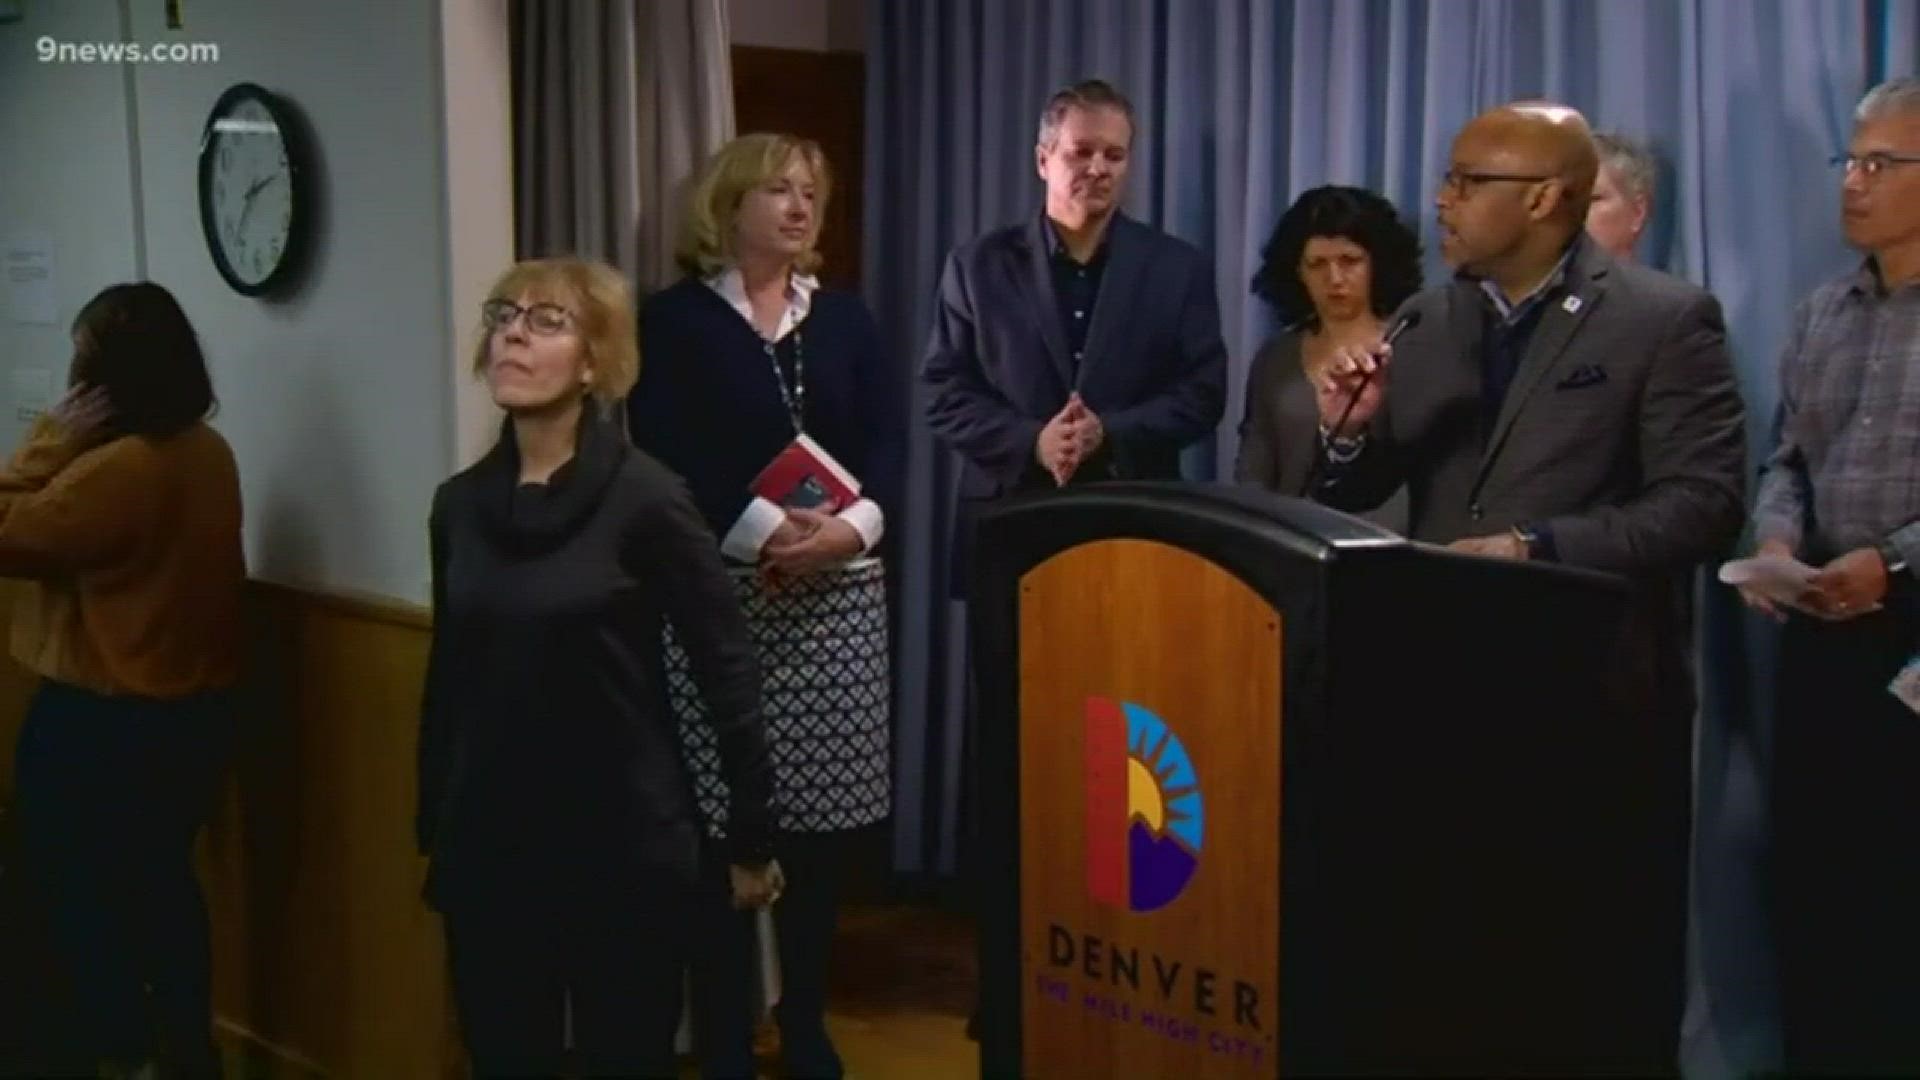 The closures include Red Rocks and the Denver Center for Performing Arts.